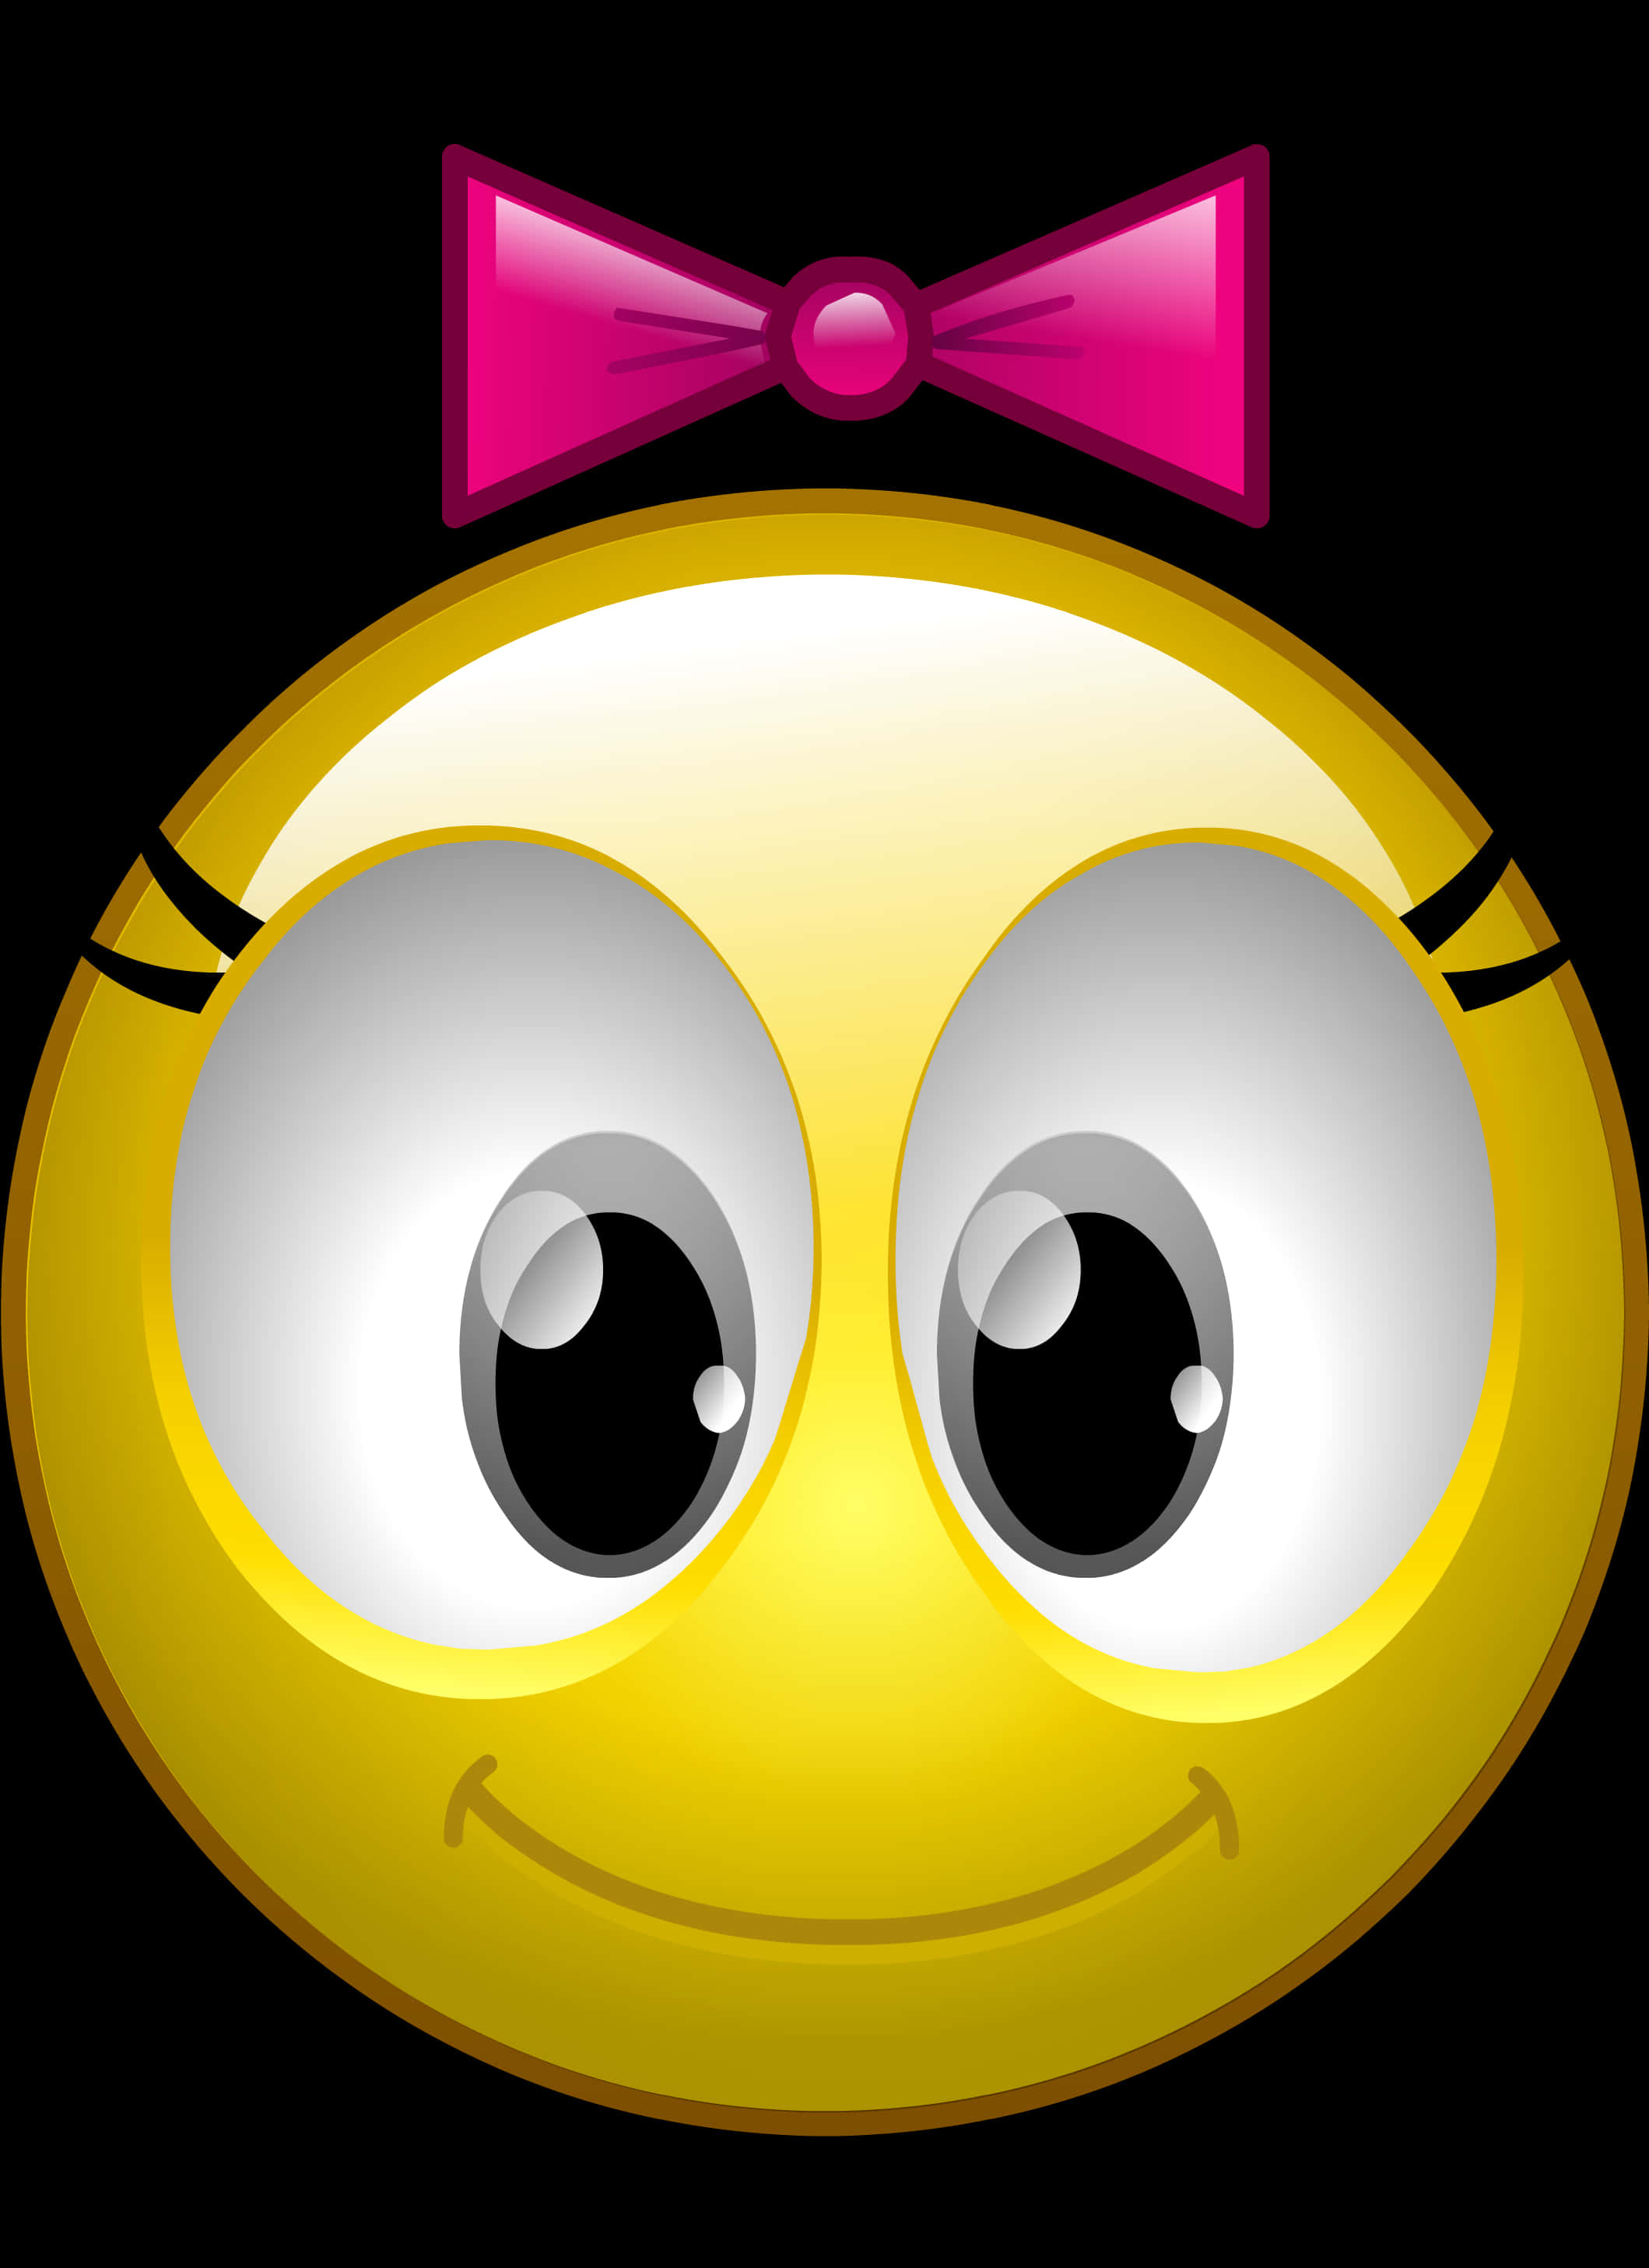 A Yellow Smiley Face With Pink Bow